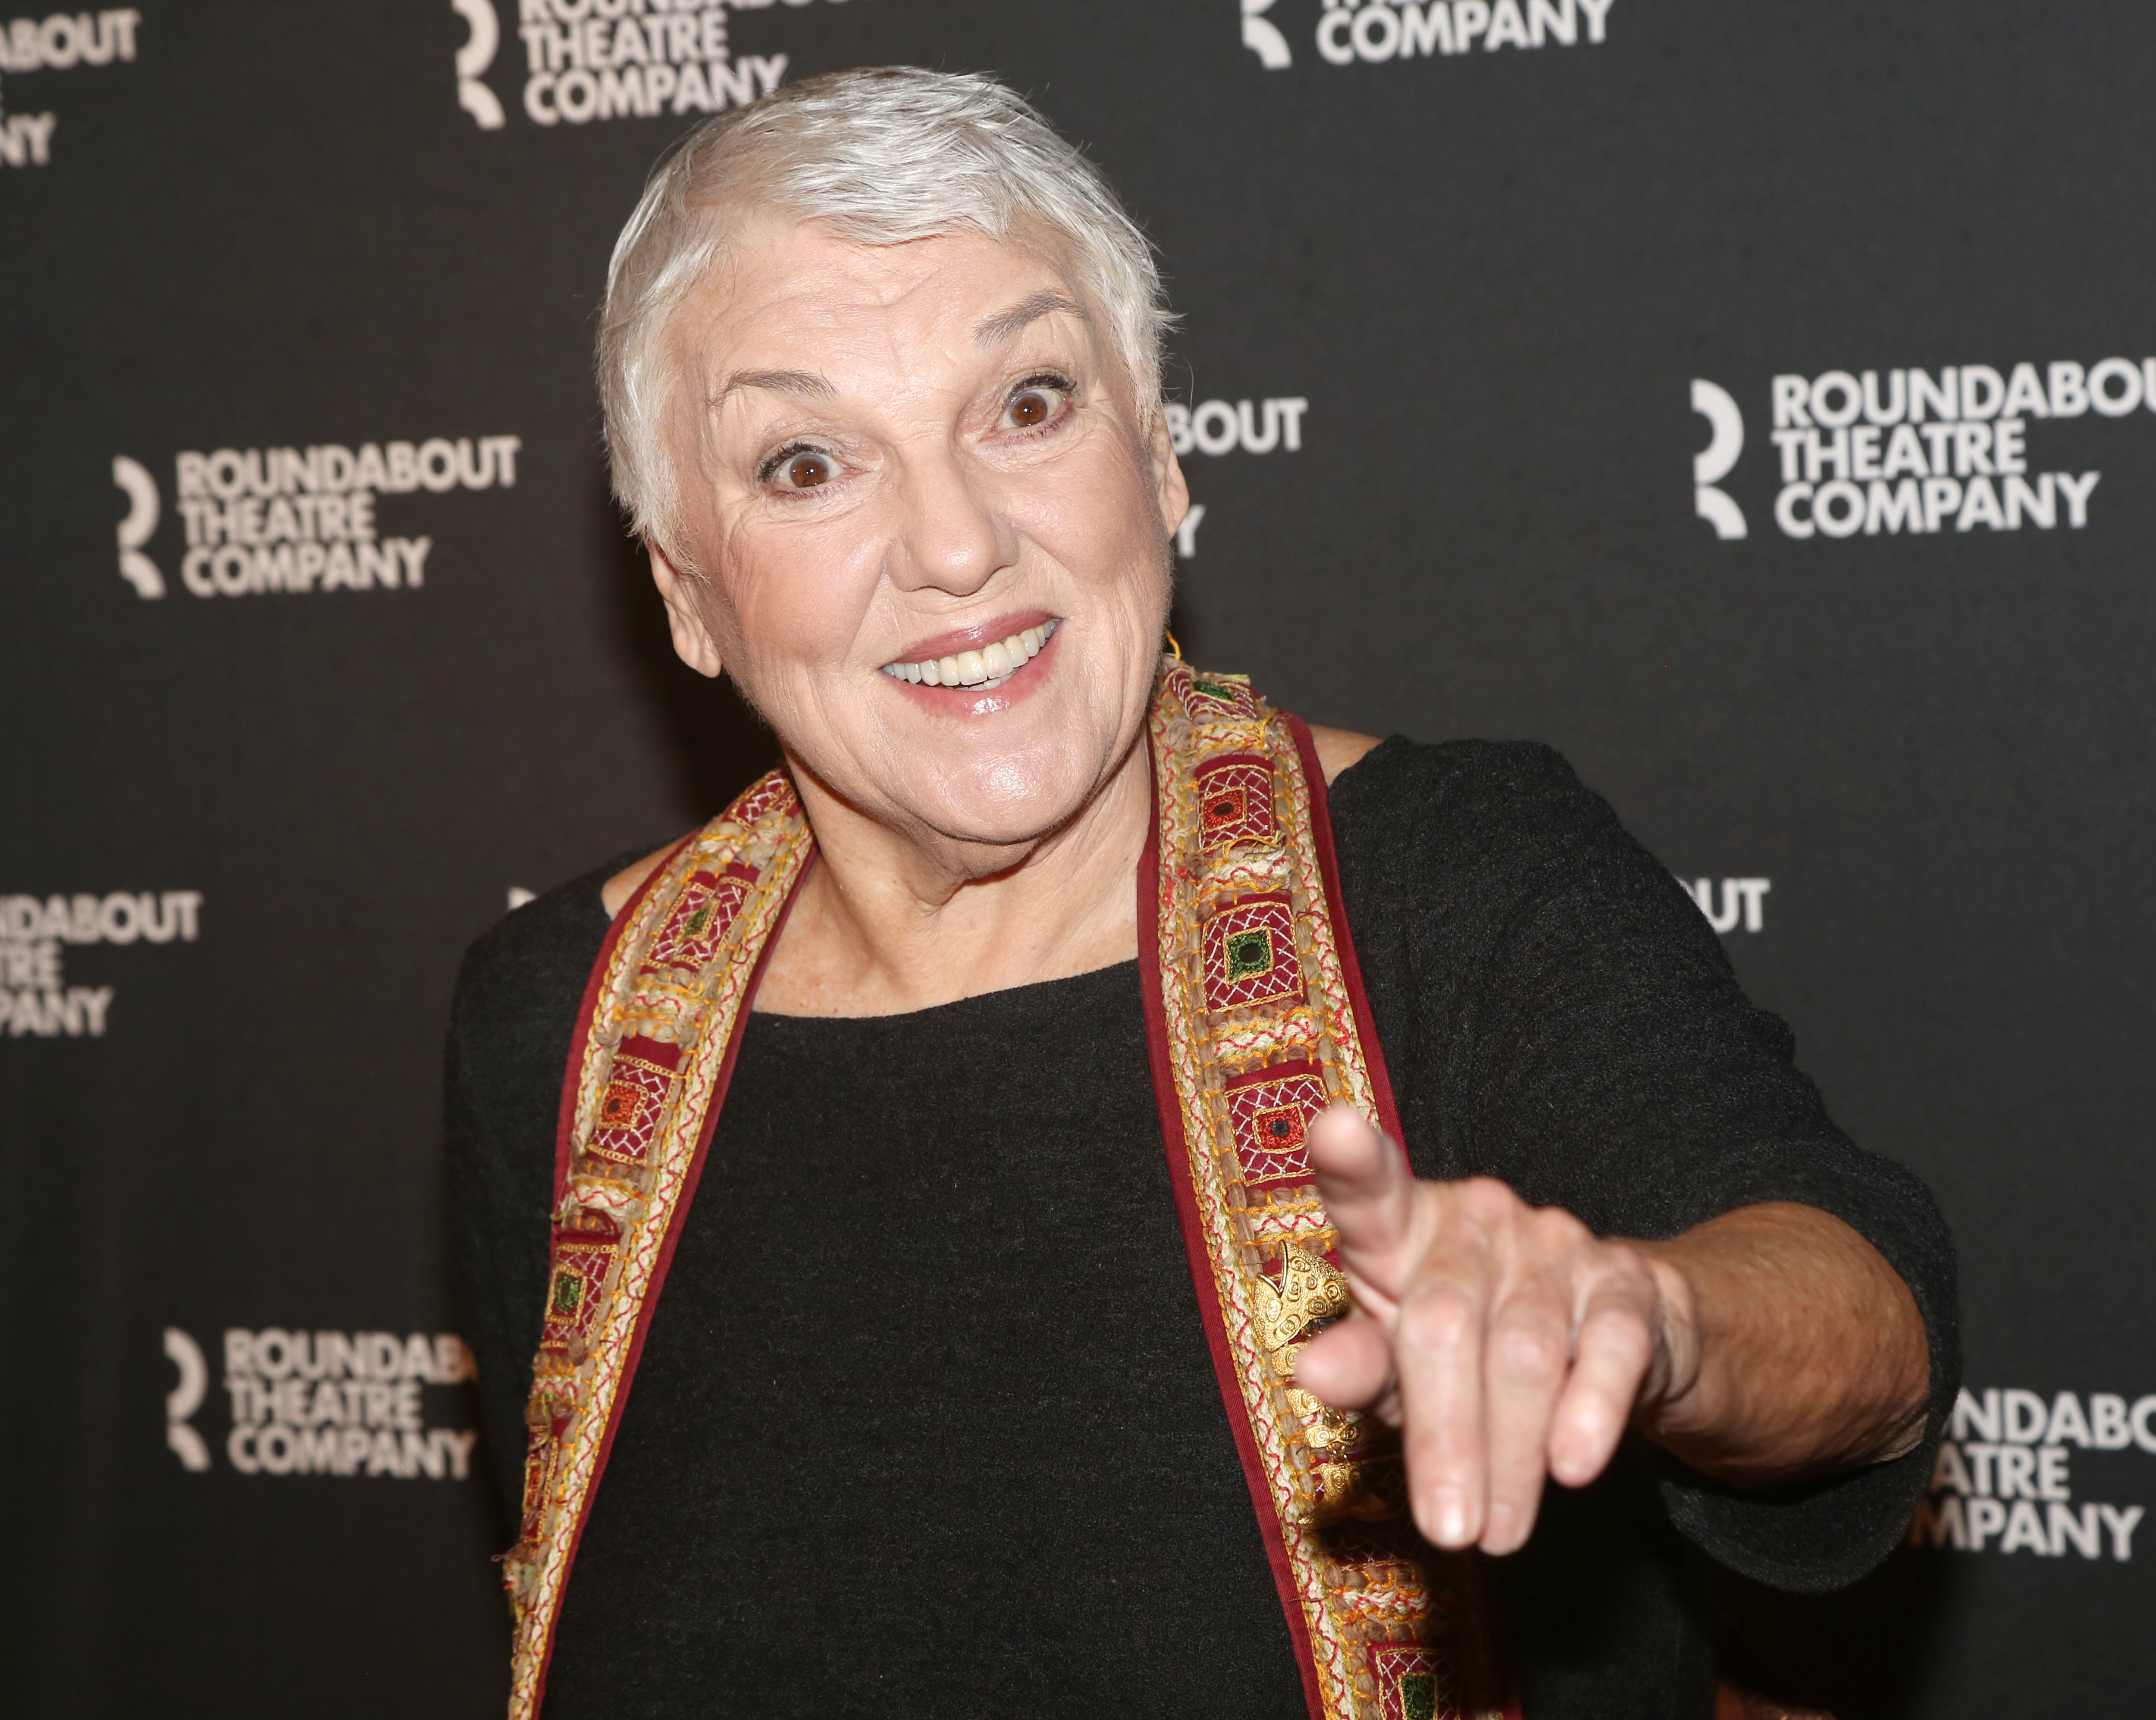 Tyne Daly poses at a photo call for the revival of the Roundabout Theatre Company production of play "Doubt: A Parable" at The Knickerbocker Hotel on January 10, 2024 in New York City. | Source: Getty Images